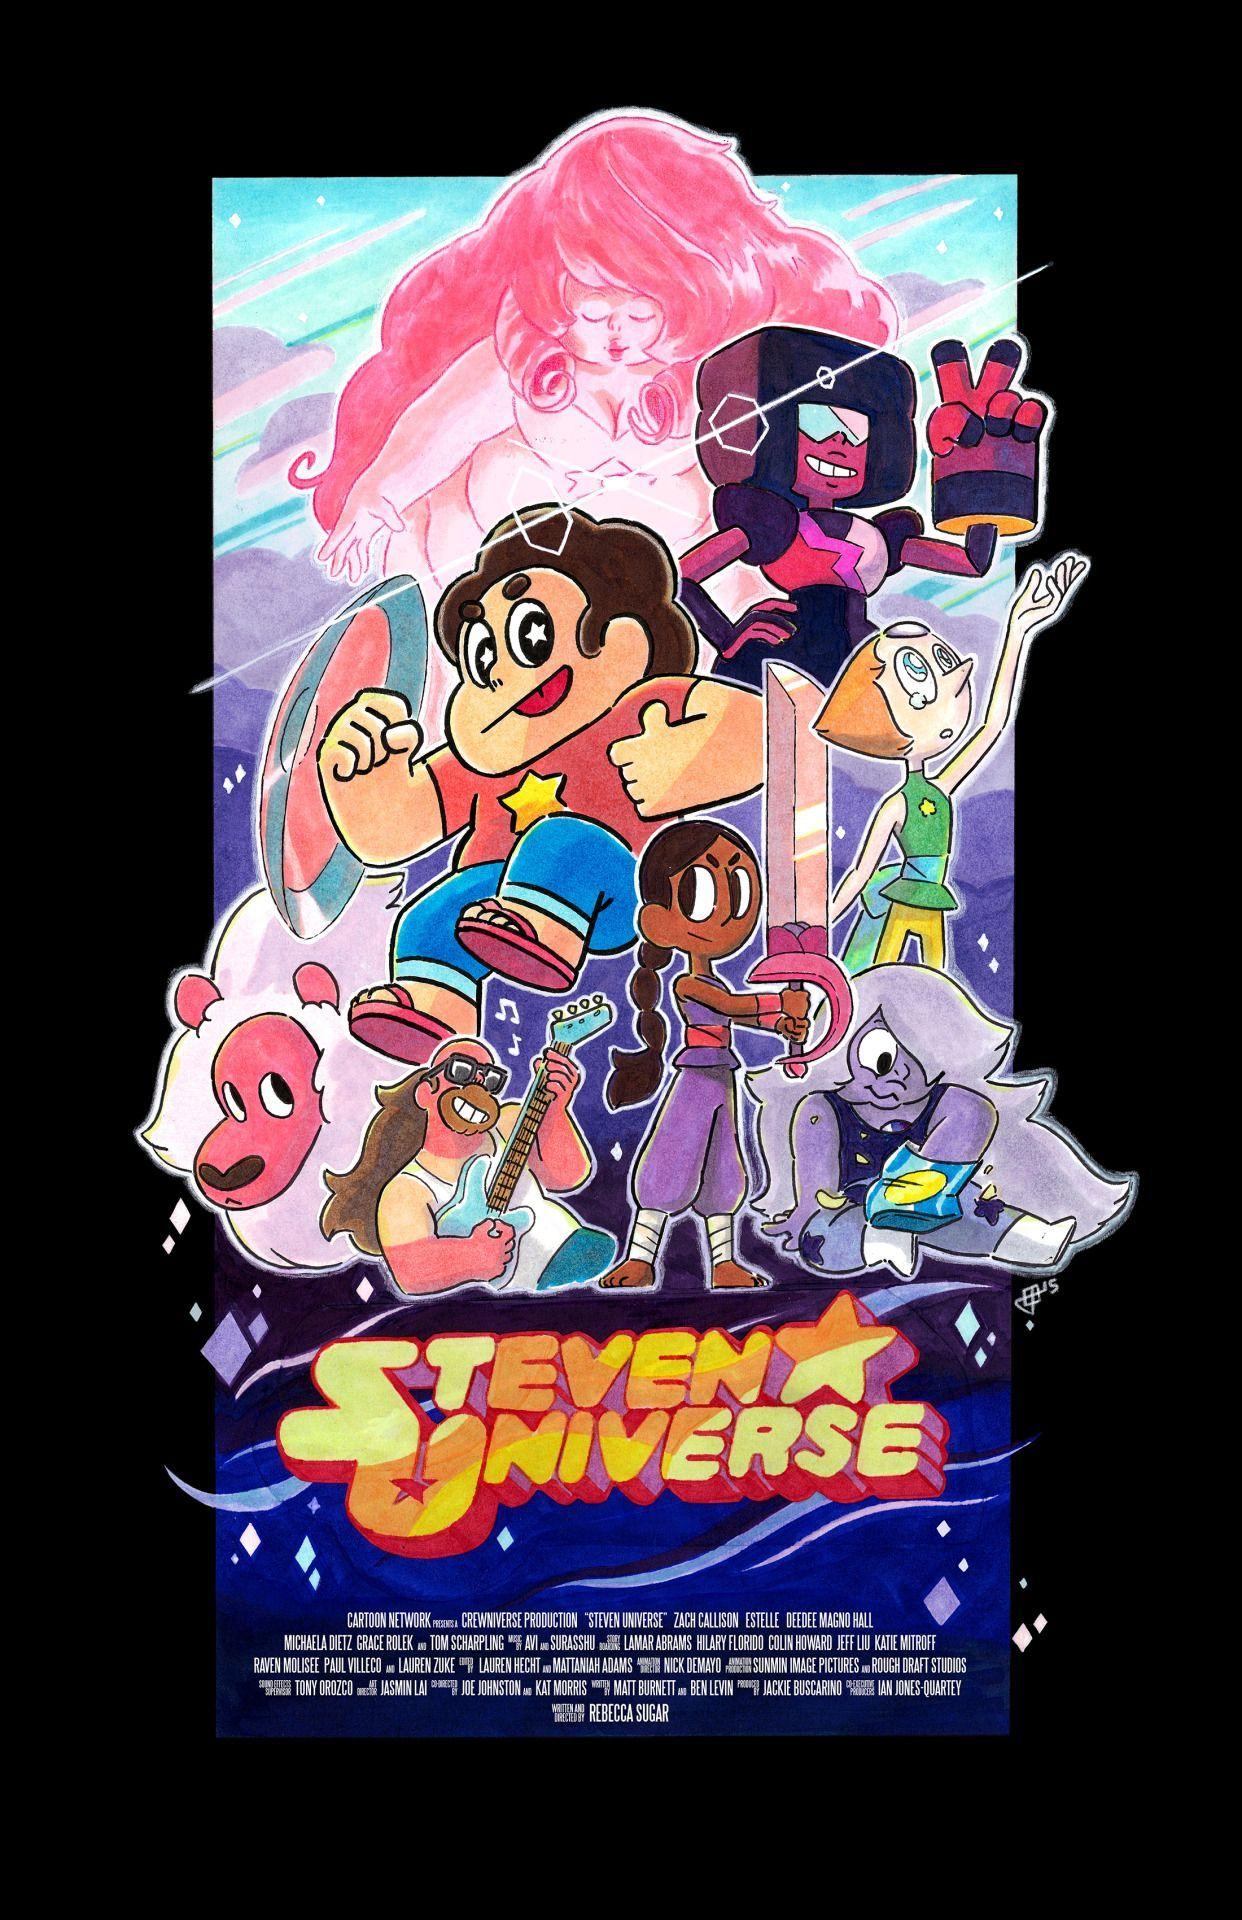 Steven Universe The Movie Wallpapers Top Free Steven Universe Images, Photos, Reviews